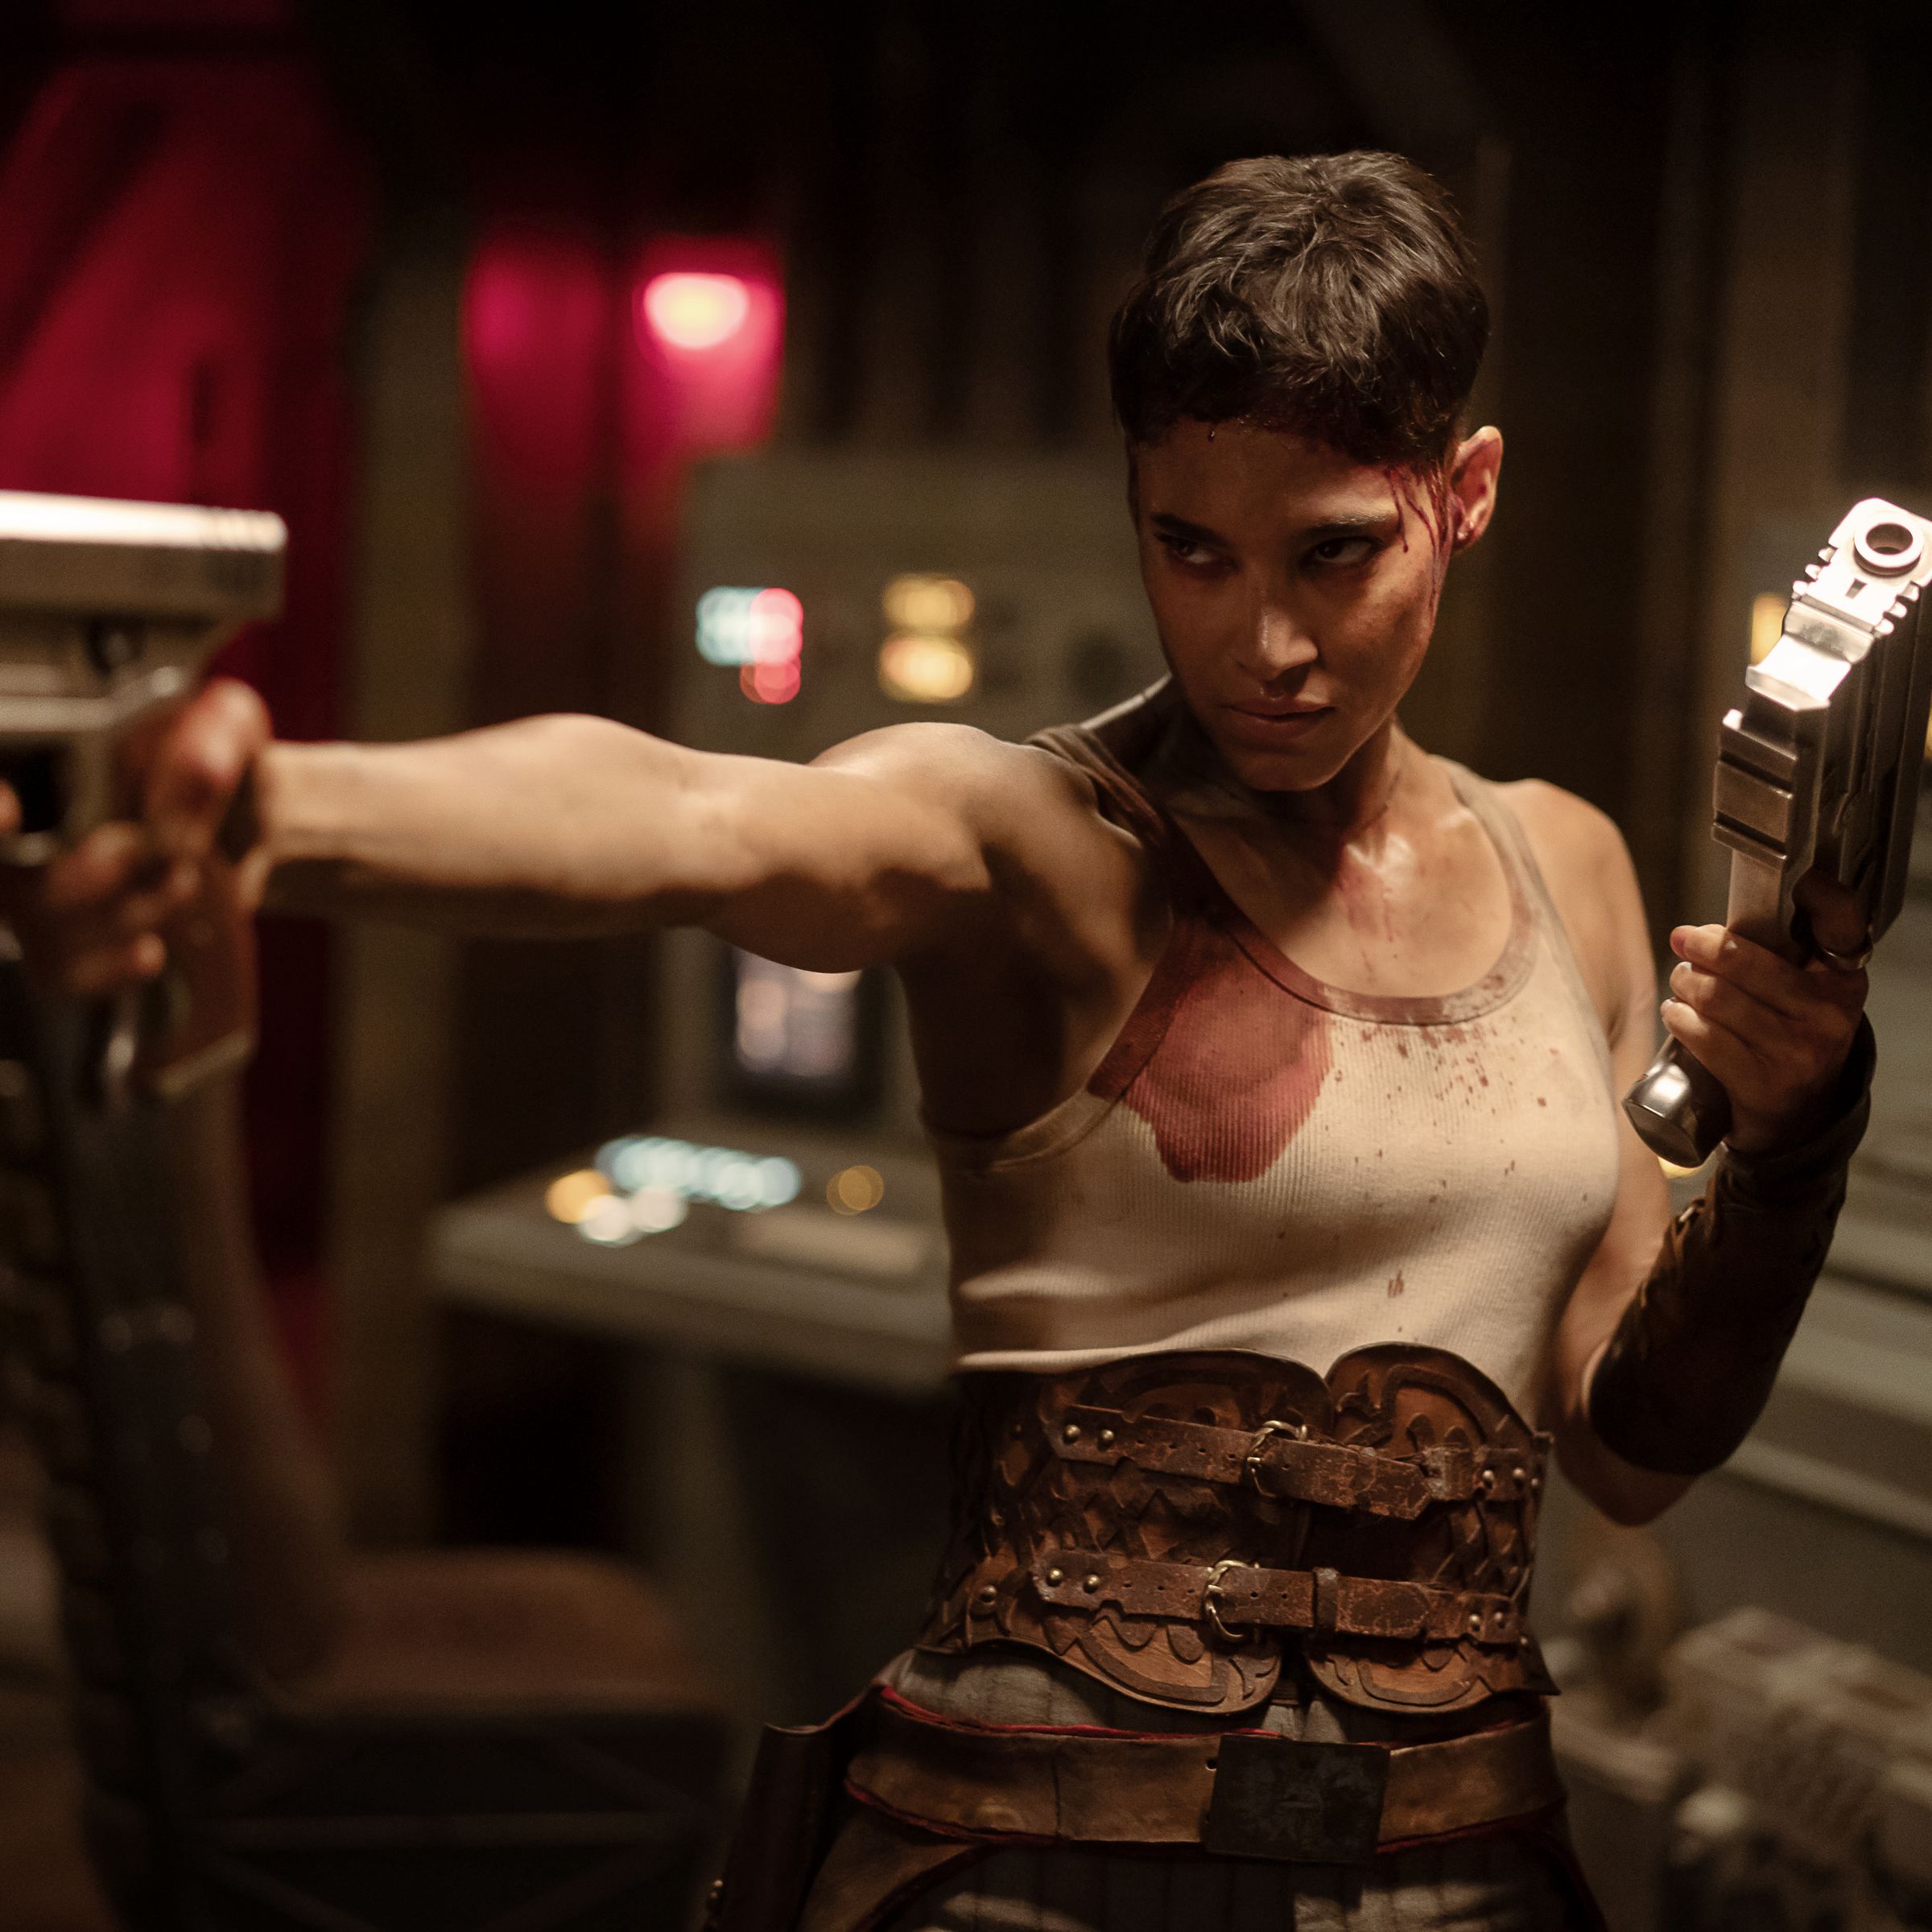 A woman in a tank top, a combat girdle, and pants holding two guns while standing in some sort of control room.